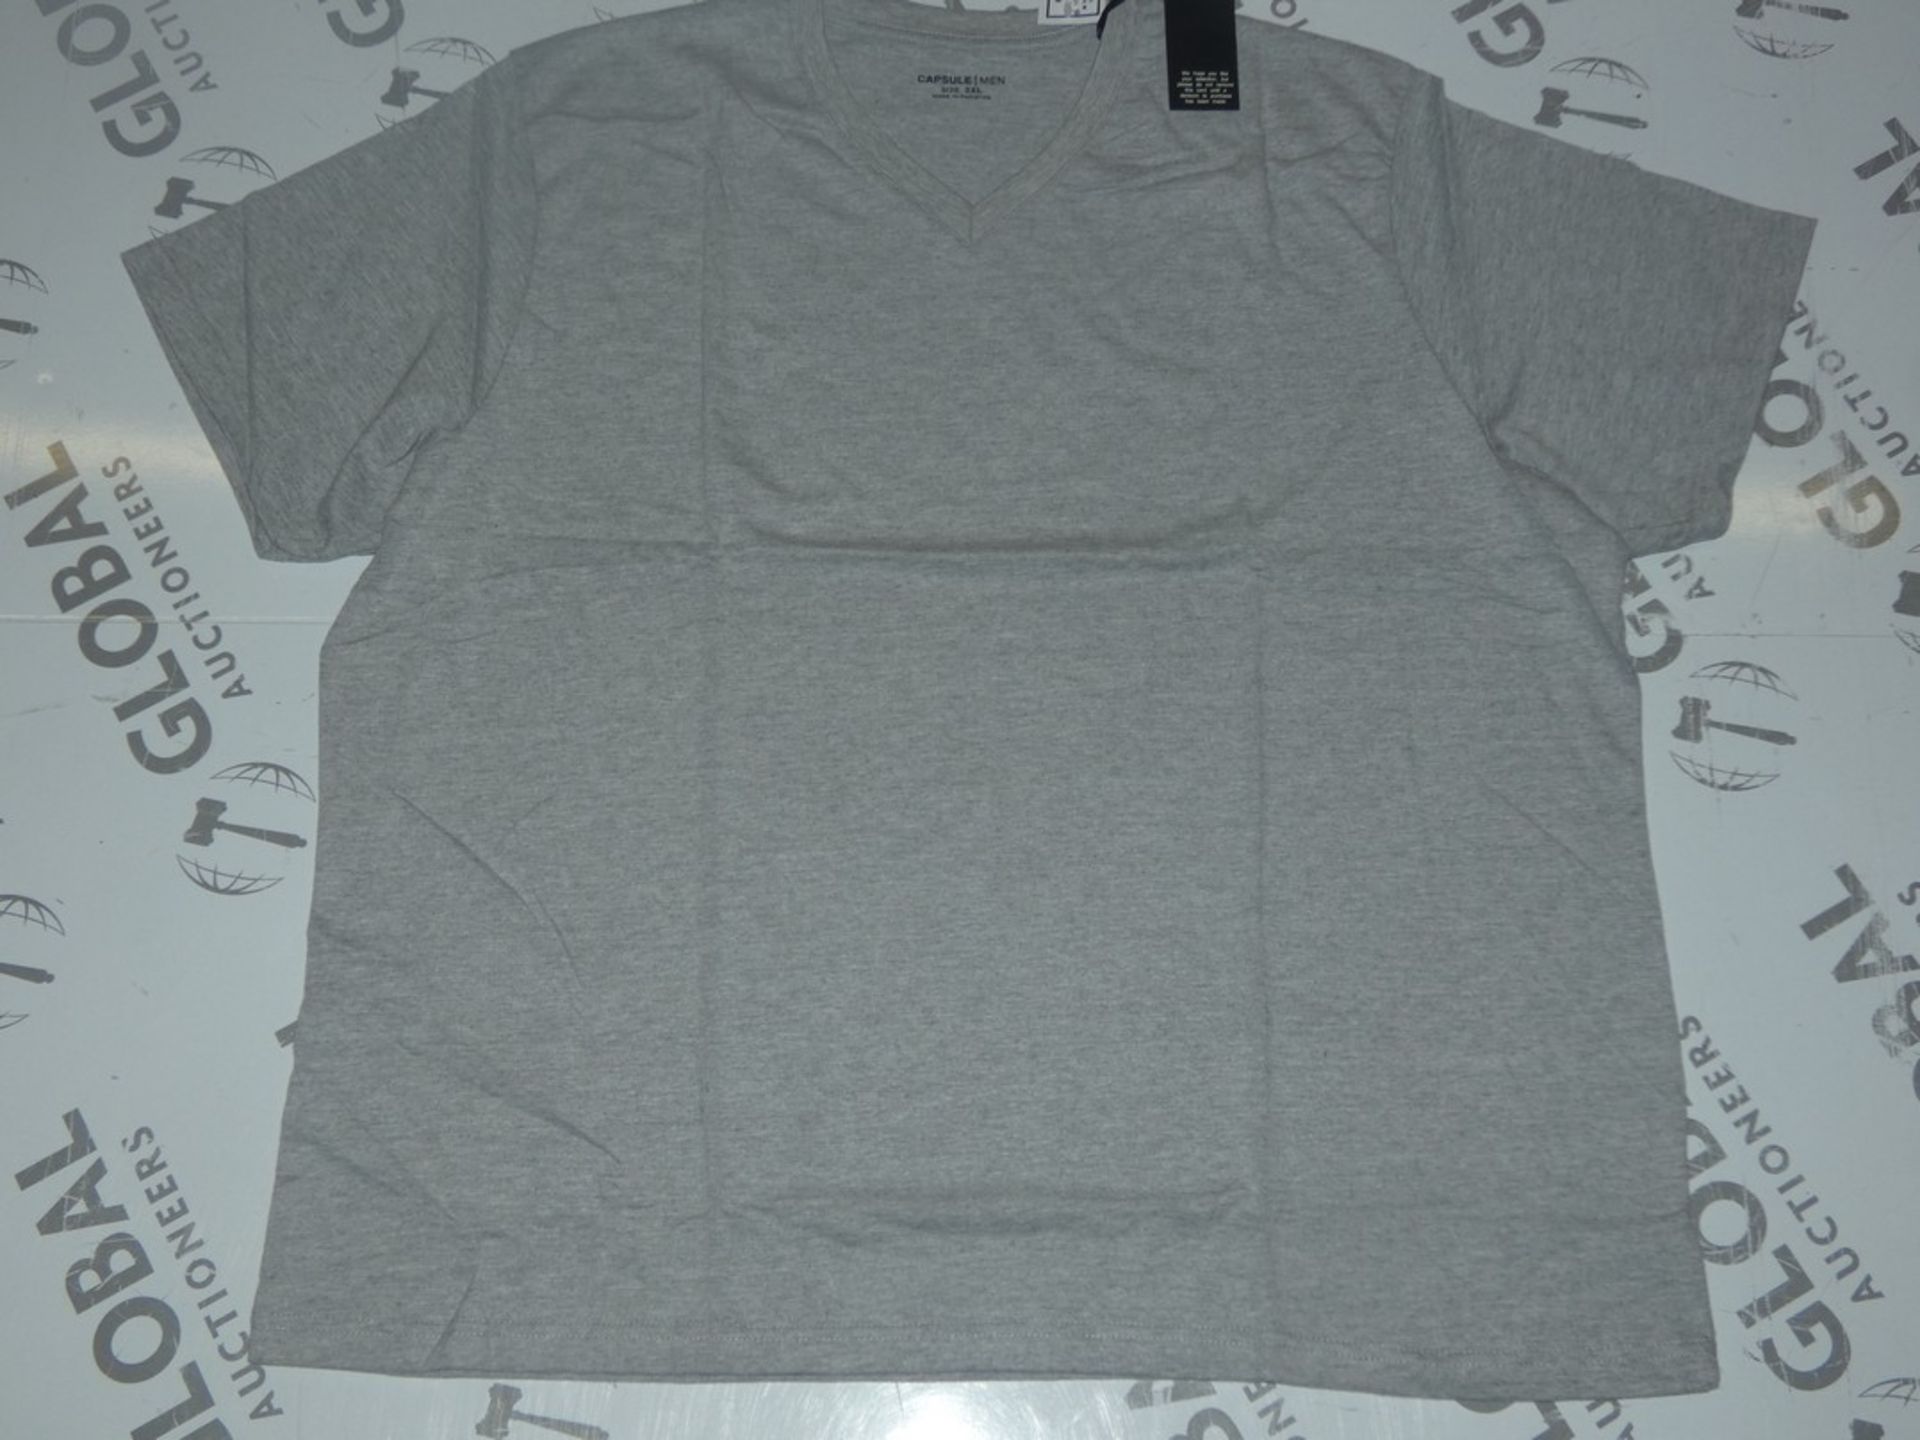 Lot to Contain 10 Brand New Capsule Men Grey V Neck Gents Designer T-Shirts Combined RRP £250